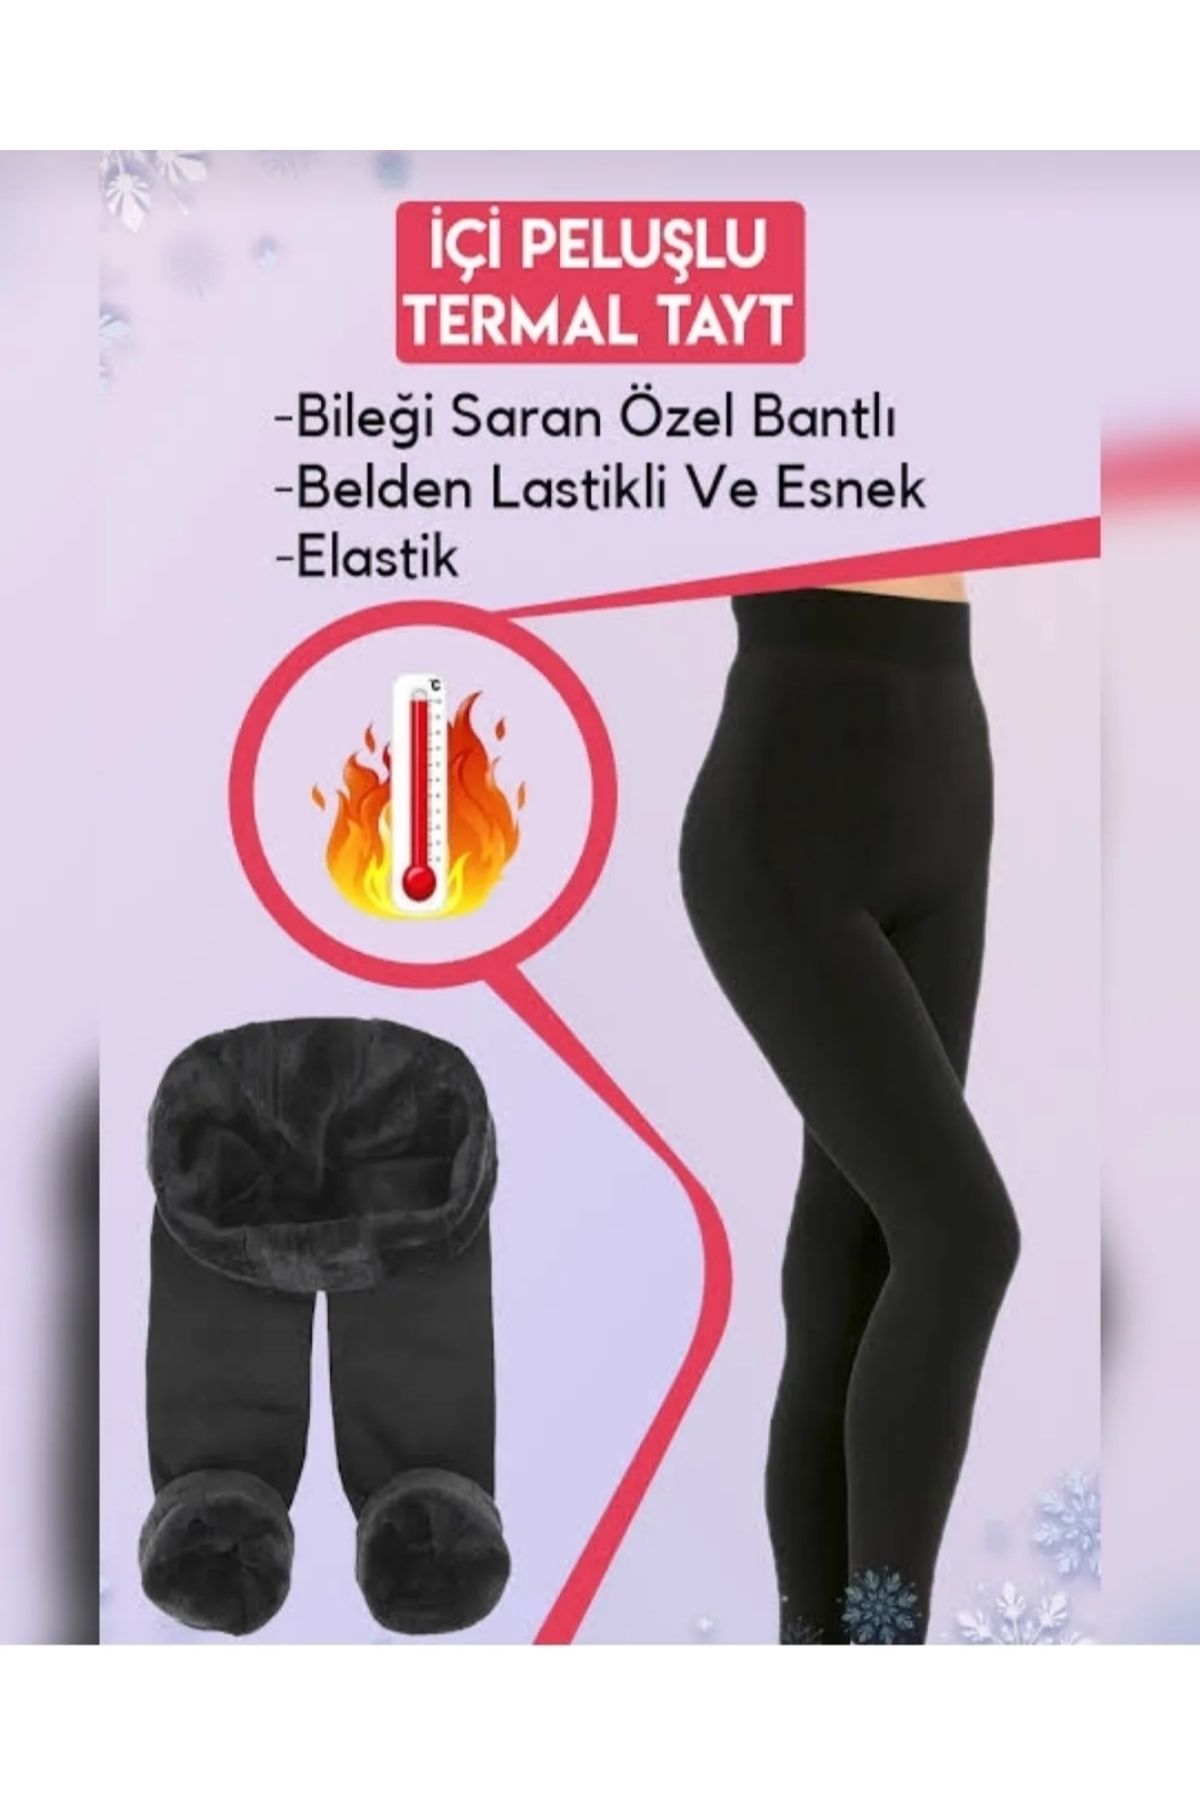 Q-İN Thermal Tights with Plush Inside, Thermal Tights, Plush, Plush Inside,  Fleece Inside, Warming Tights